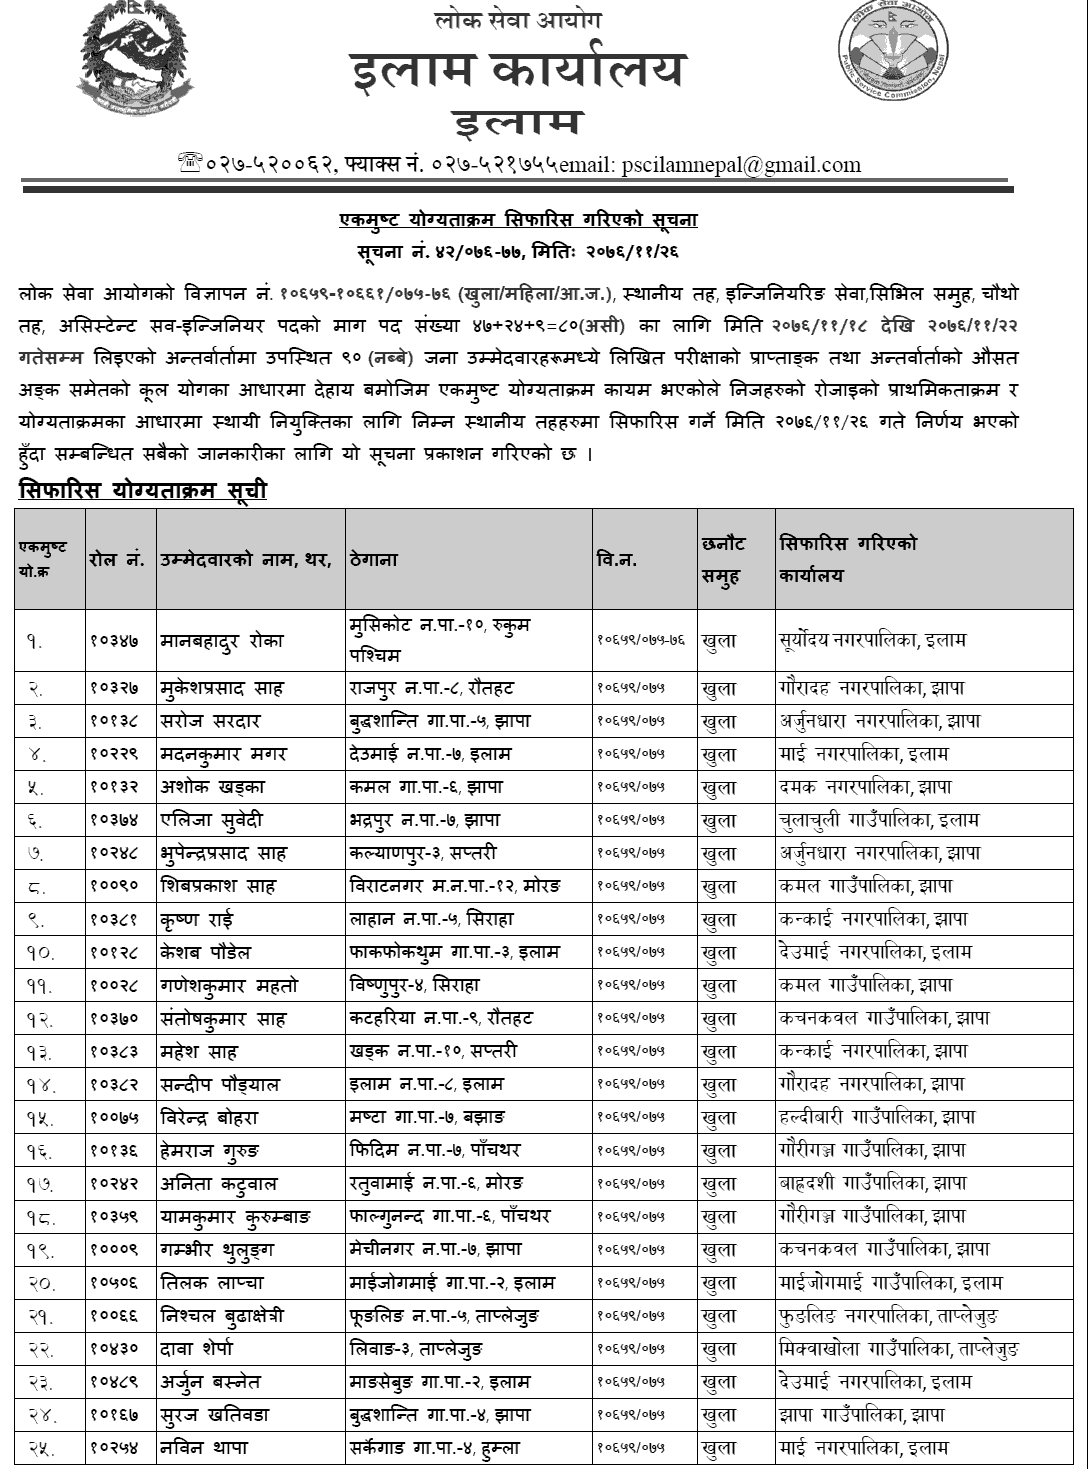 Lok Sewa Aayog Ilam Local Level 4th Assistant Sub Overseer Final Result and Sifaris